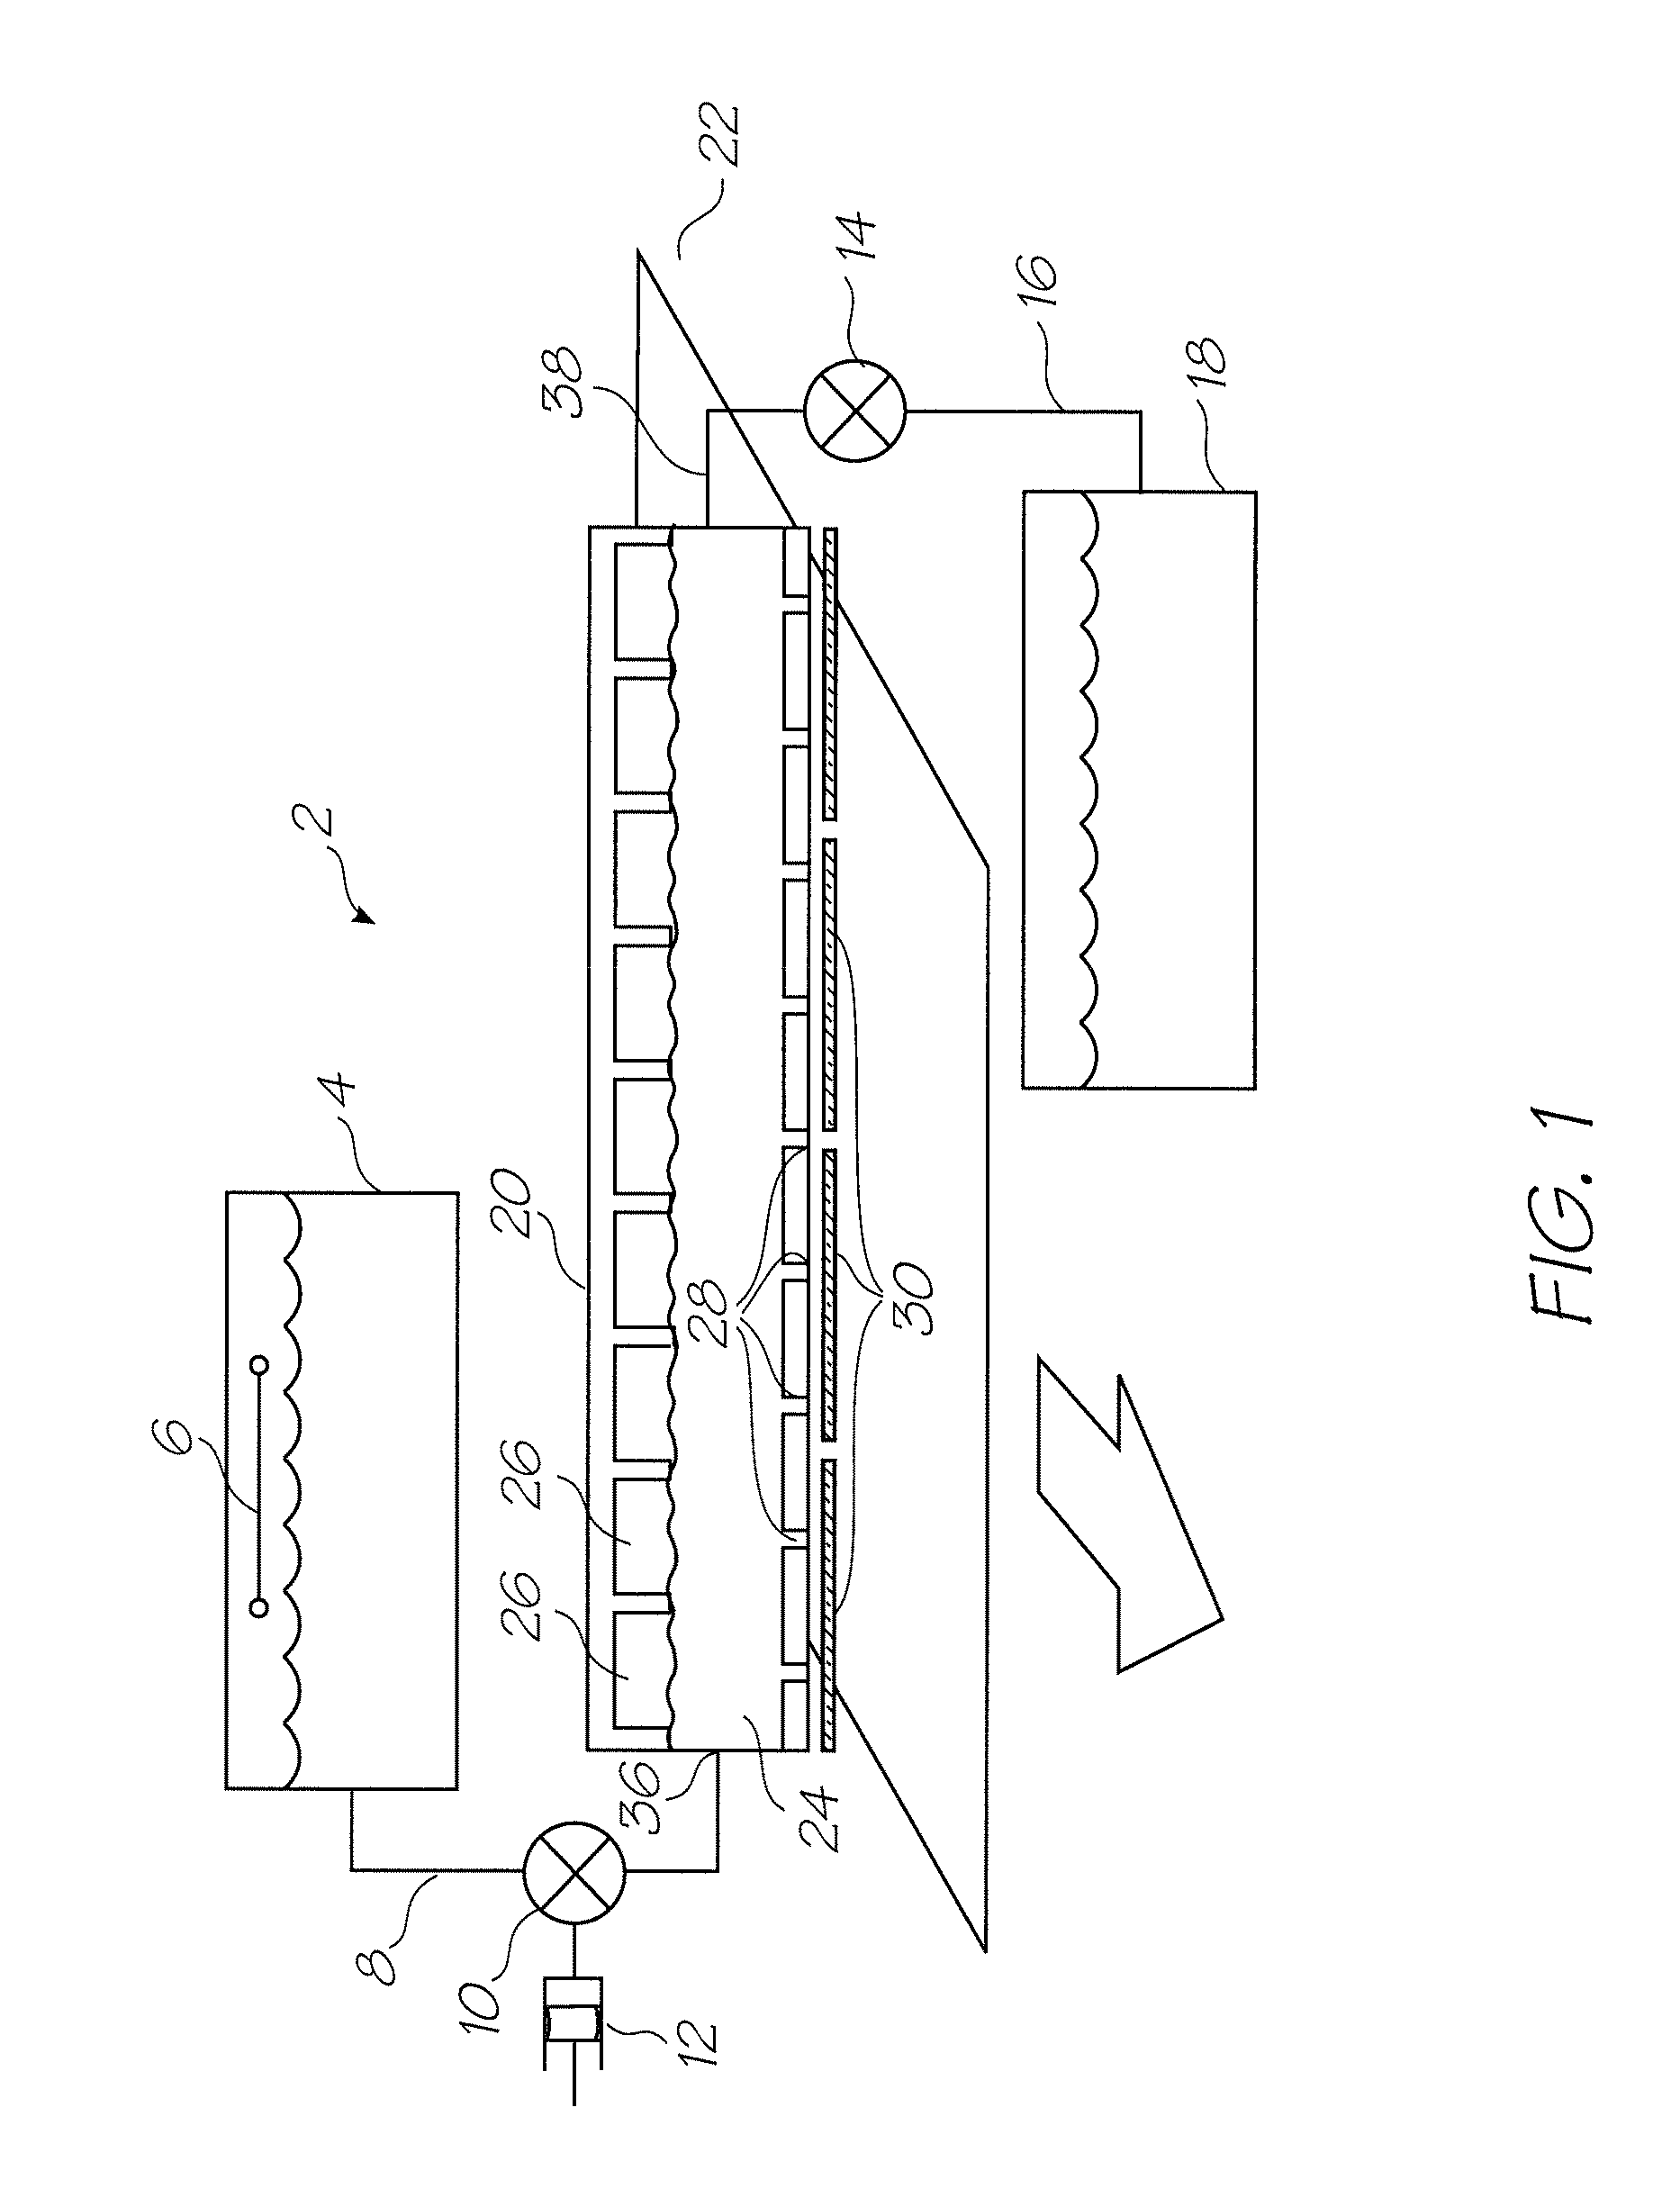 Printhead maintenance facility with nozzle wiper movable parallel to media feed direction